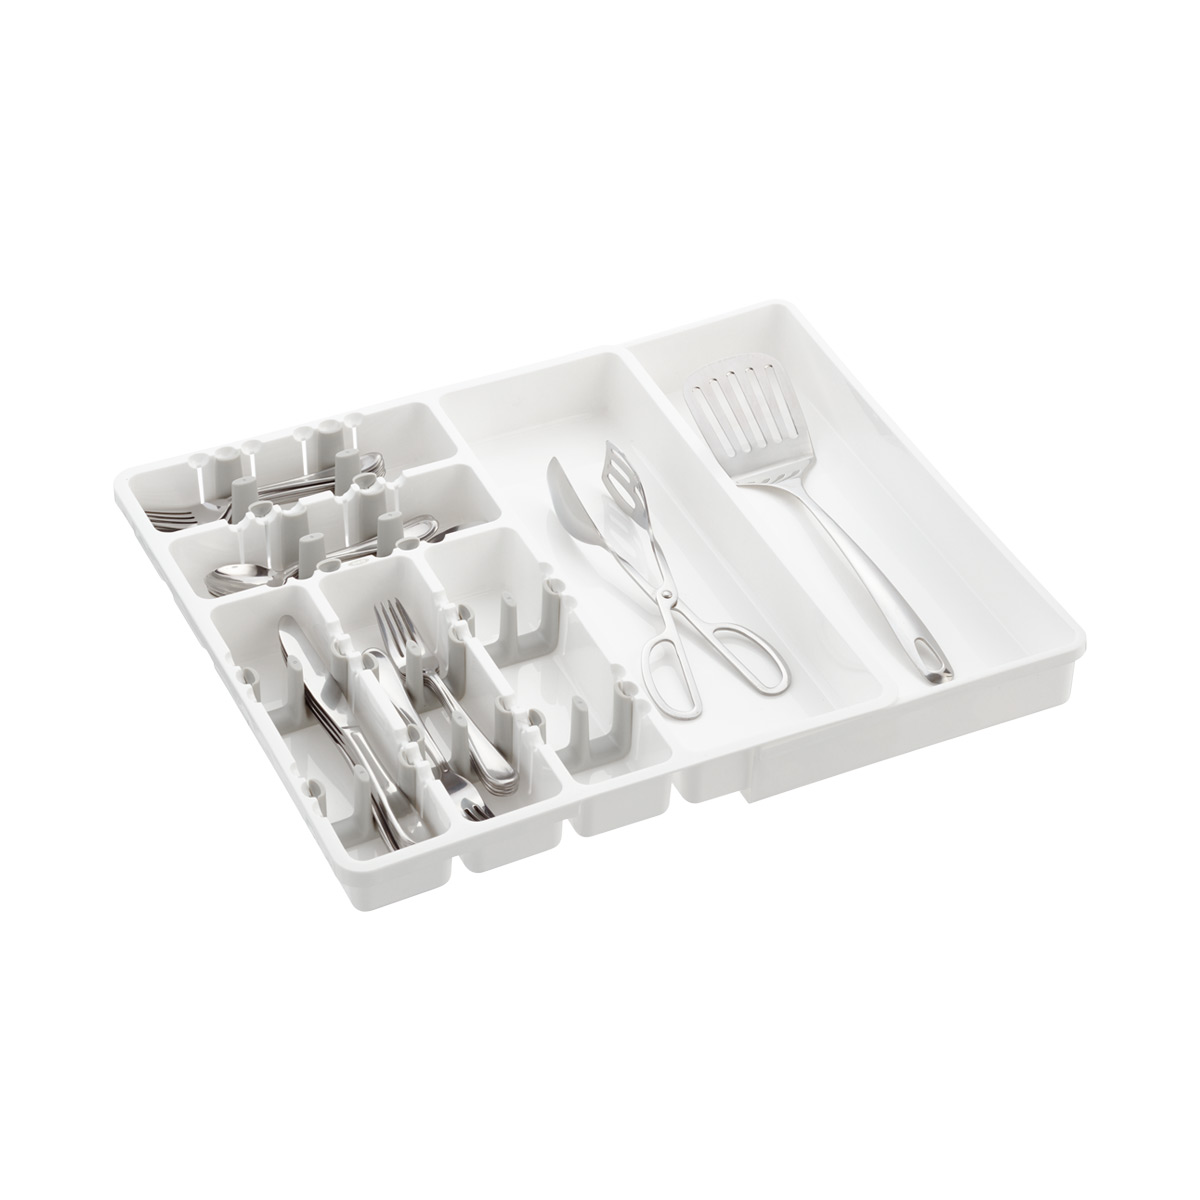 https://www.containerstore.com/catalogimages/323308/10072813-expandable-utensil-organize.jpg